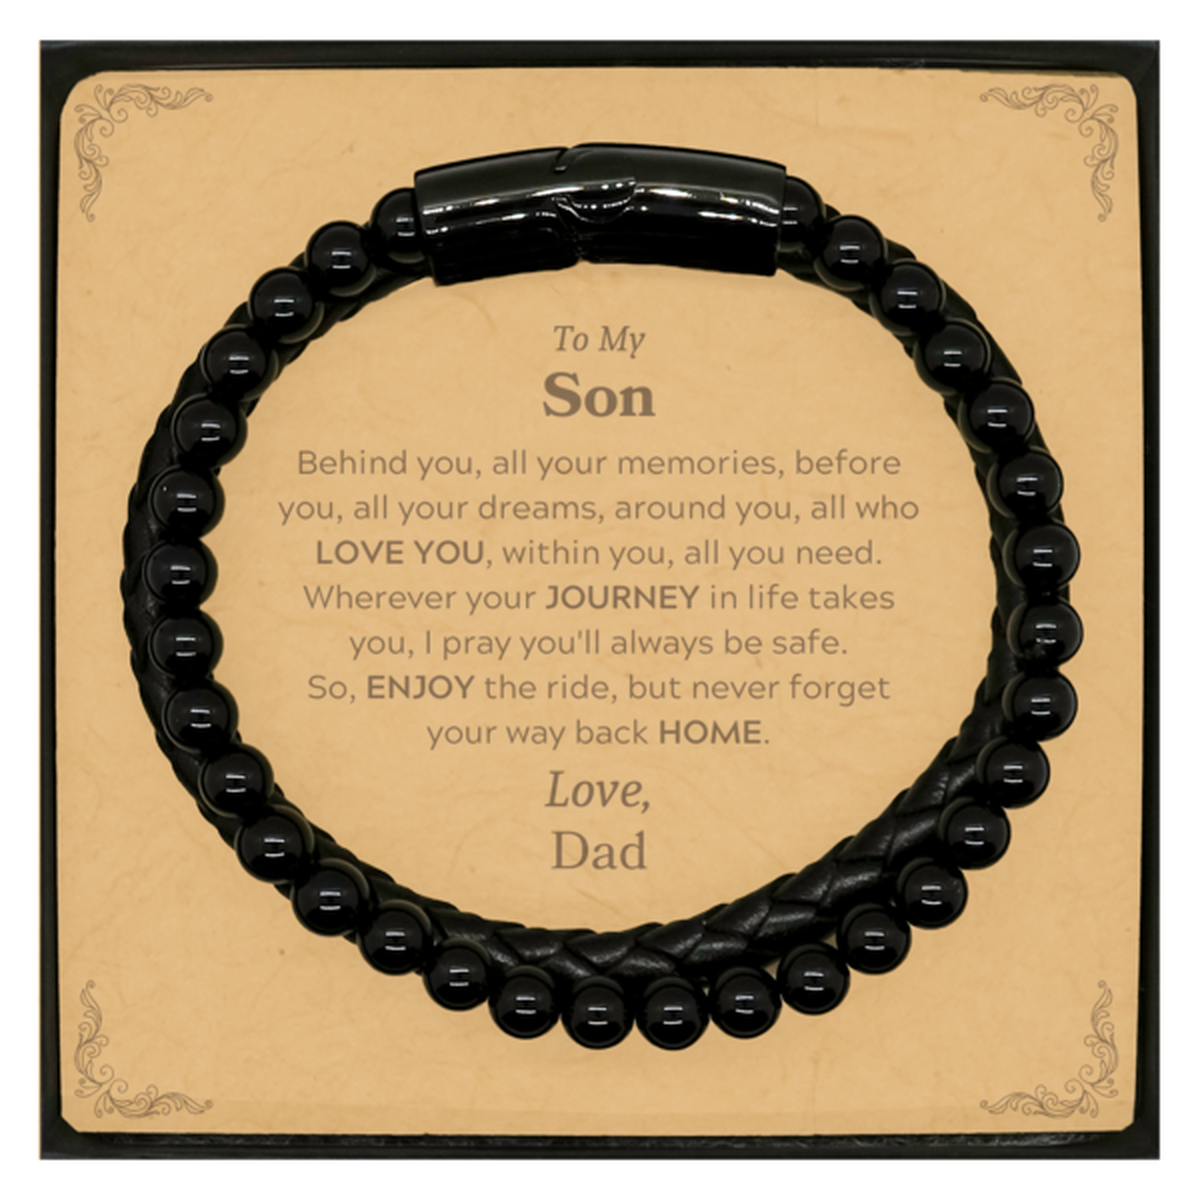 To My Son Graduation Gifts from Dad, Son Stone Leather Bracelets Christmas Birthday Gifts for Son Behind you, all your memories, before you, all your dreams. Love, Dad